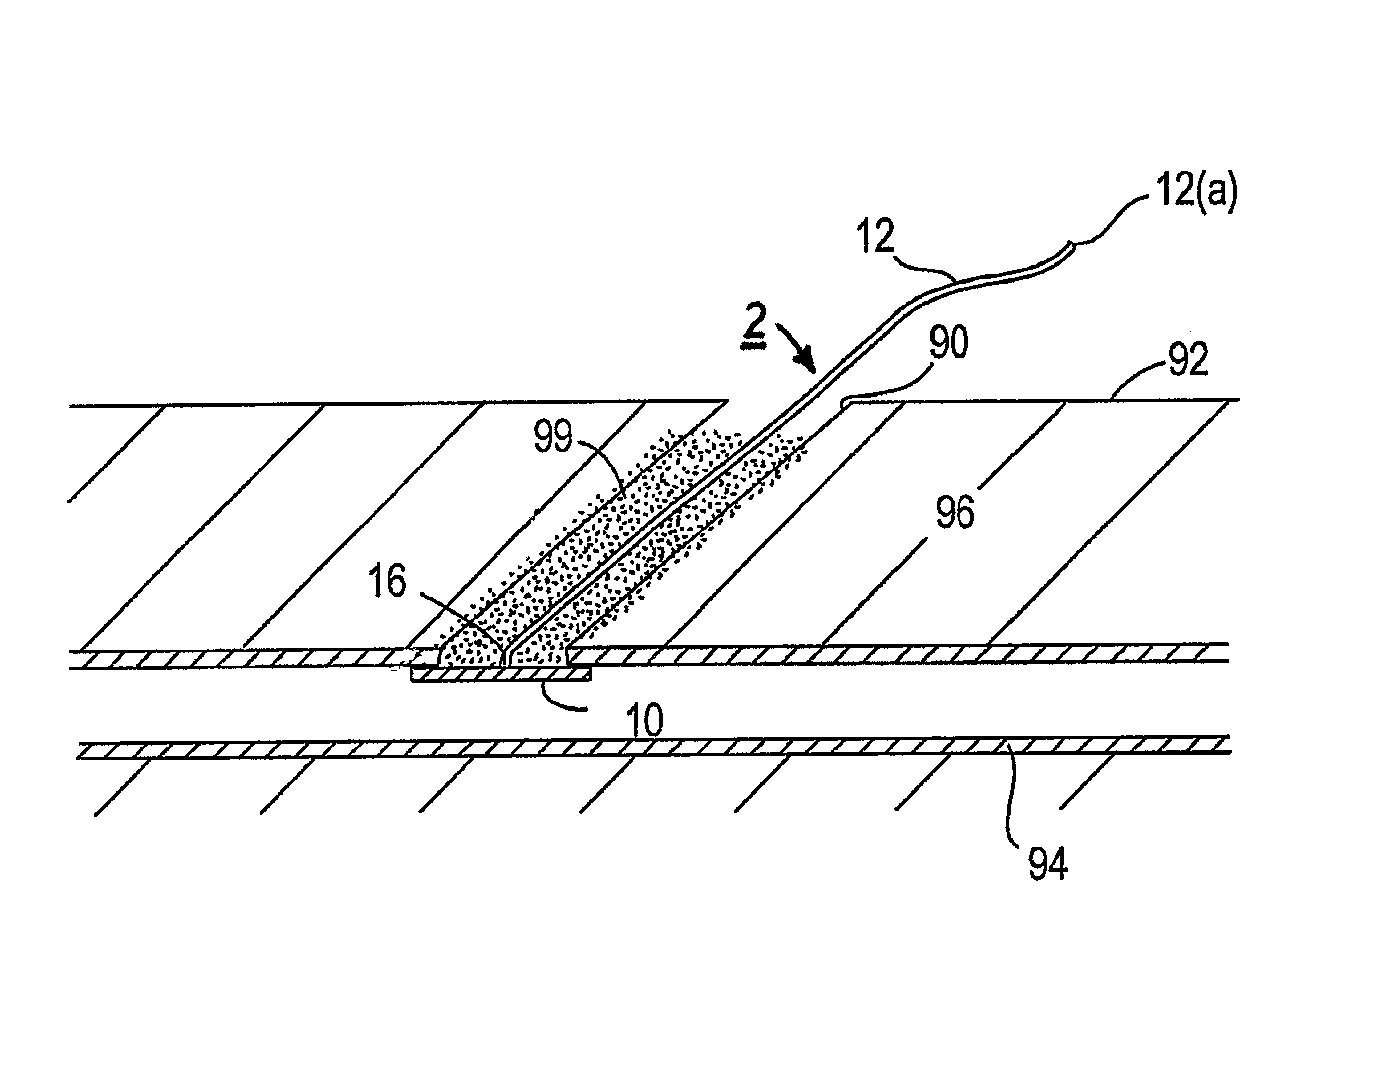 Apparatus and methods for facilitating hemostasis within a vascular puncture